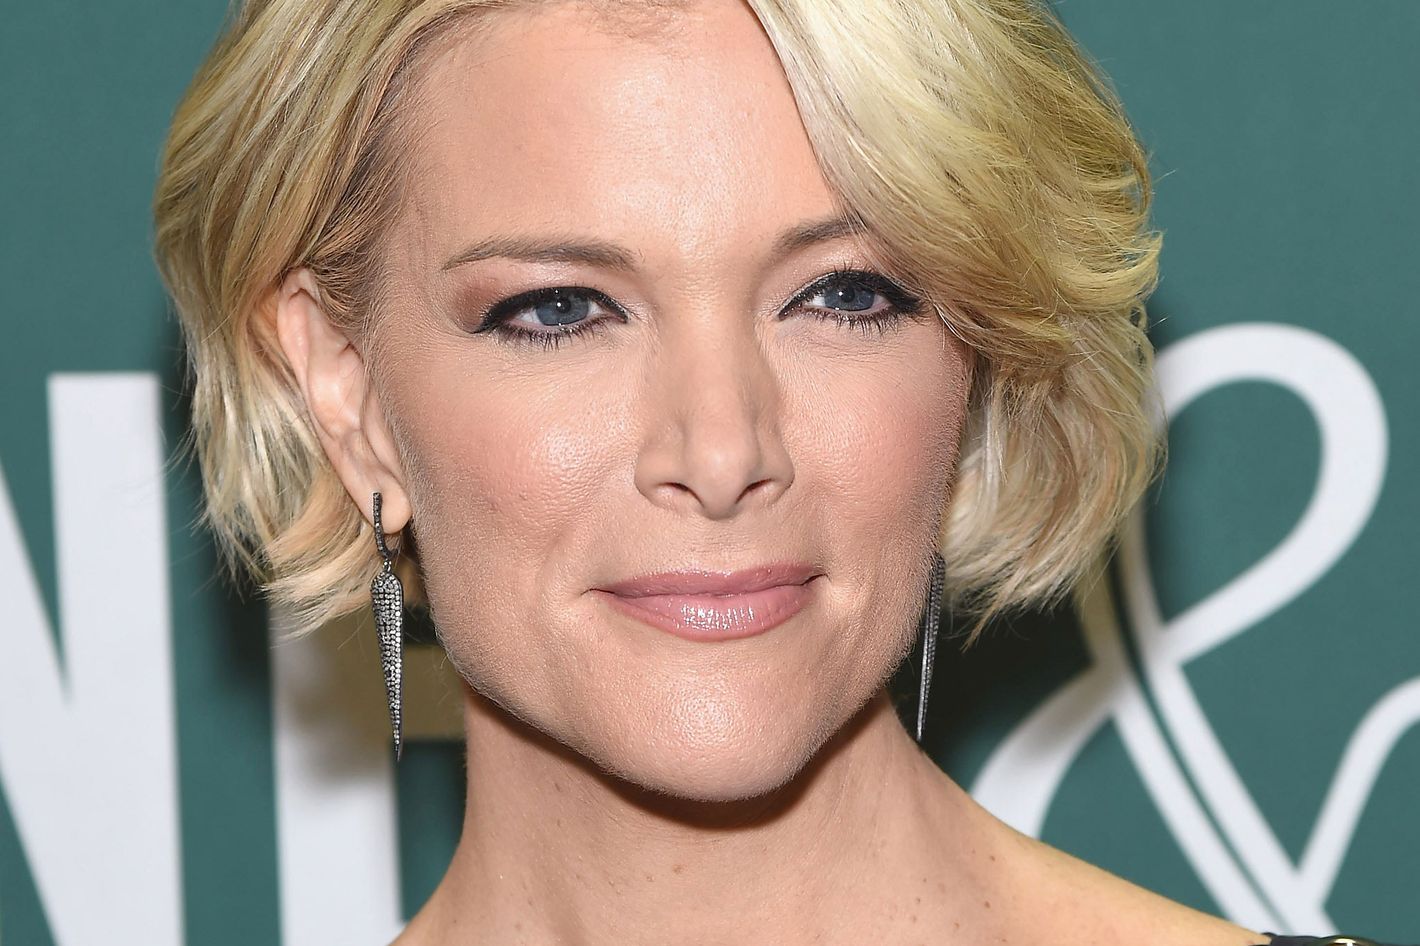 What Should Feminists Make Of Megyn Kelly